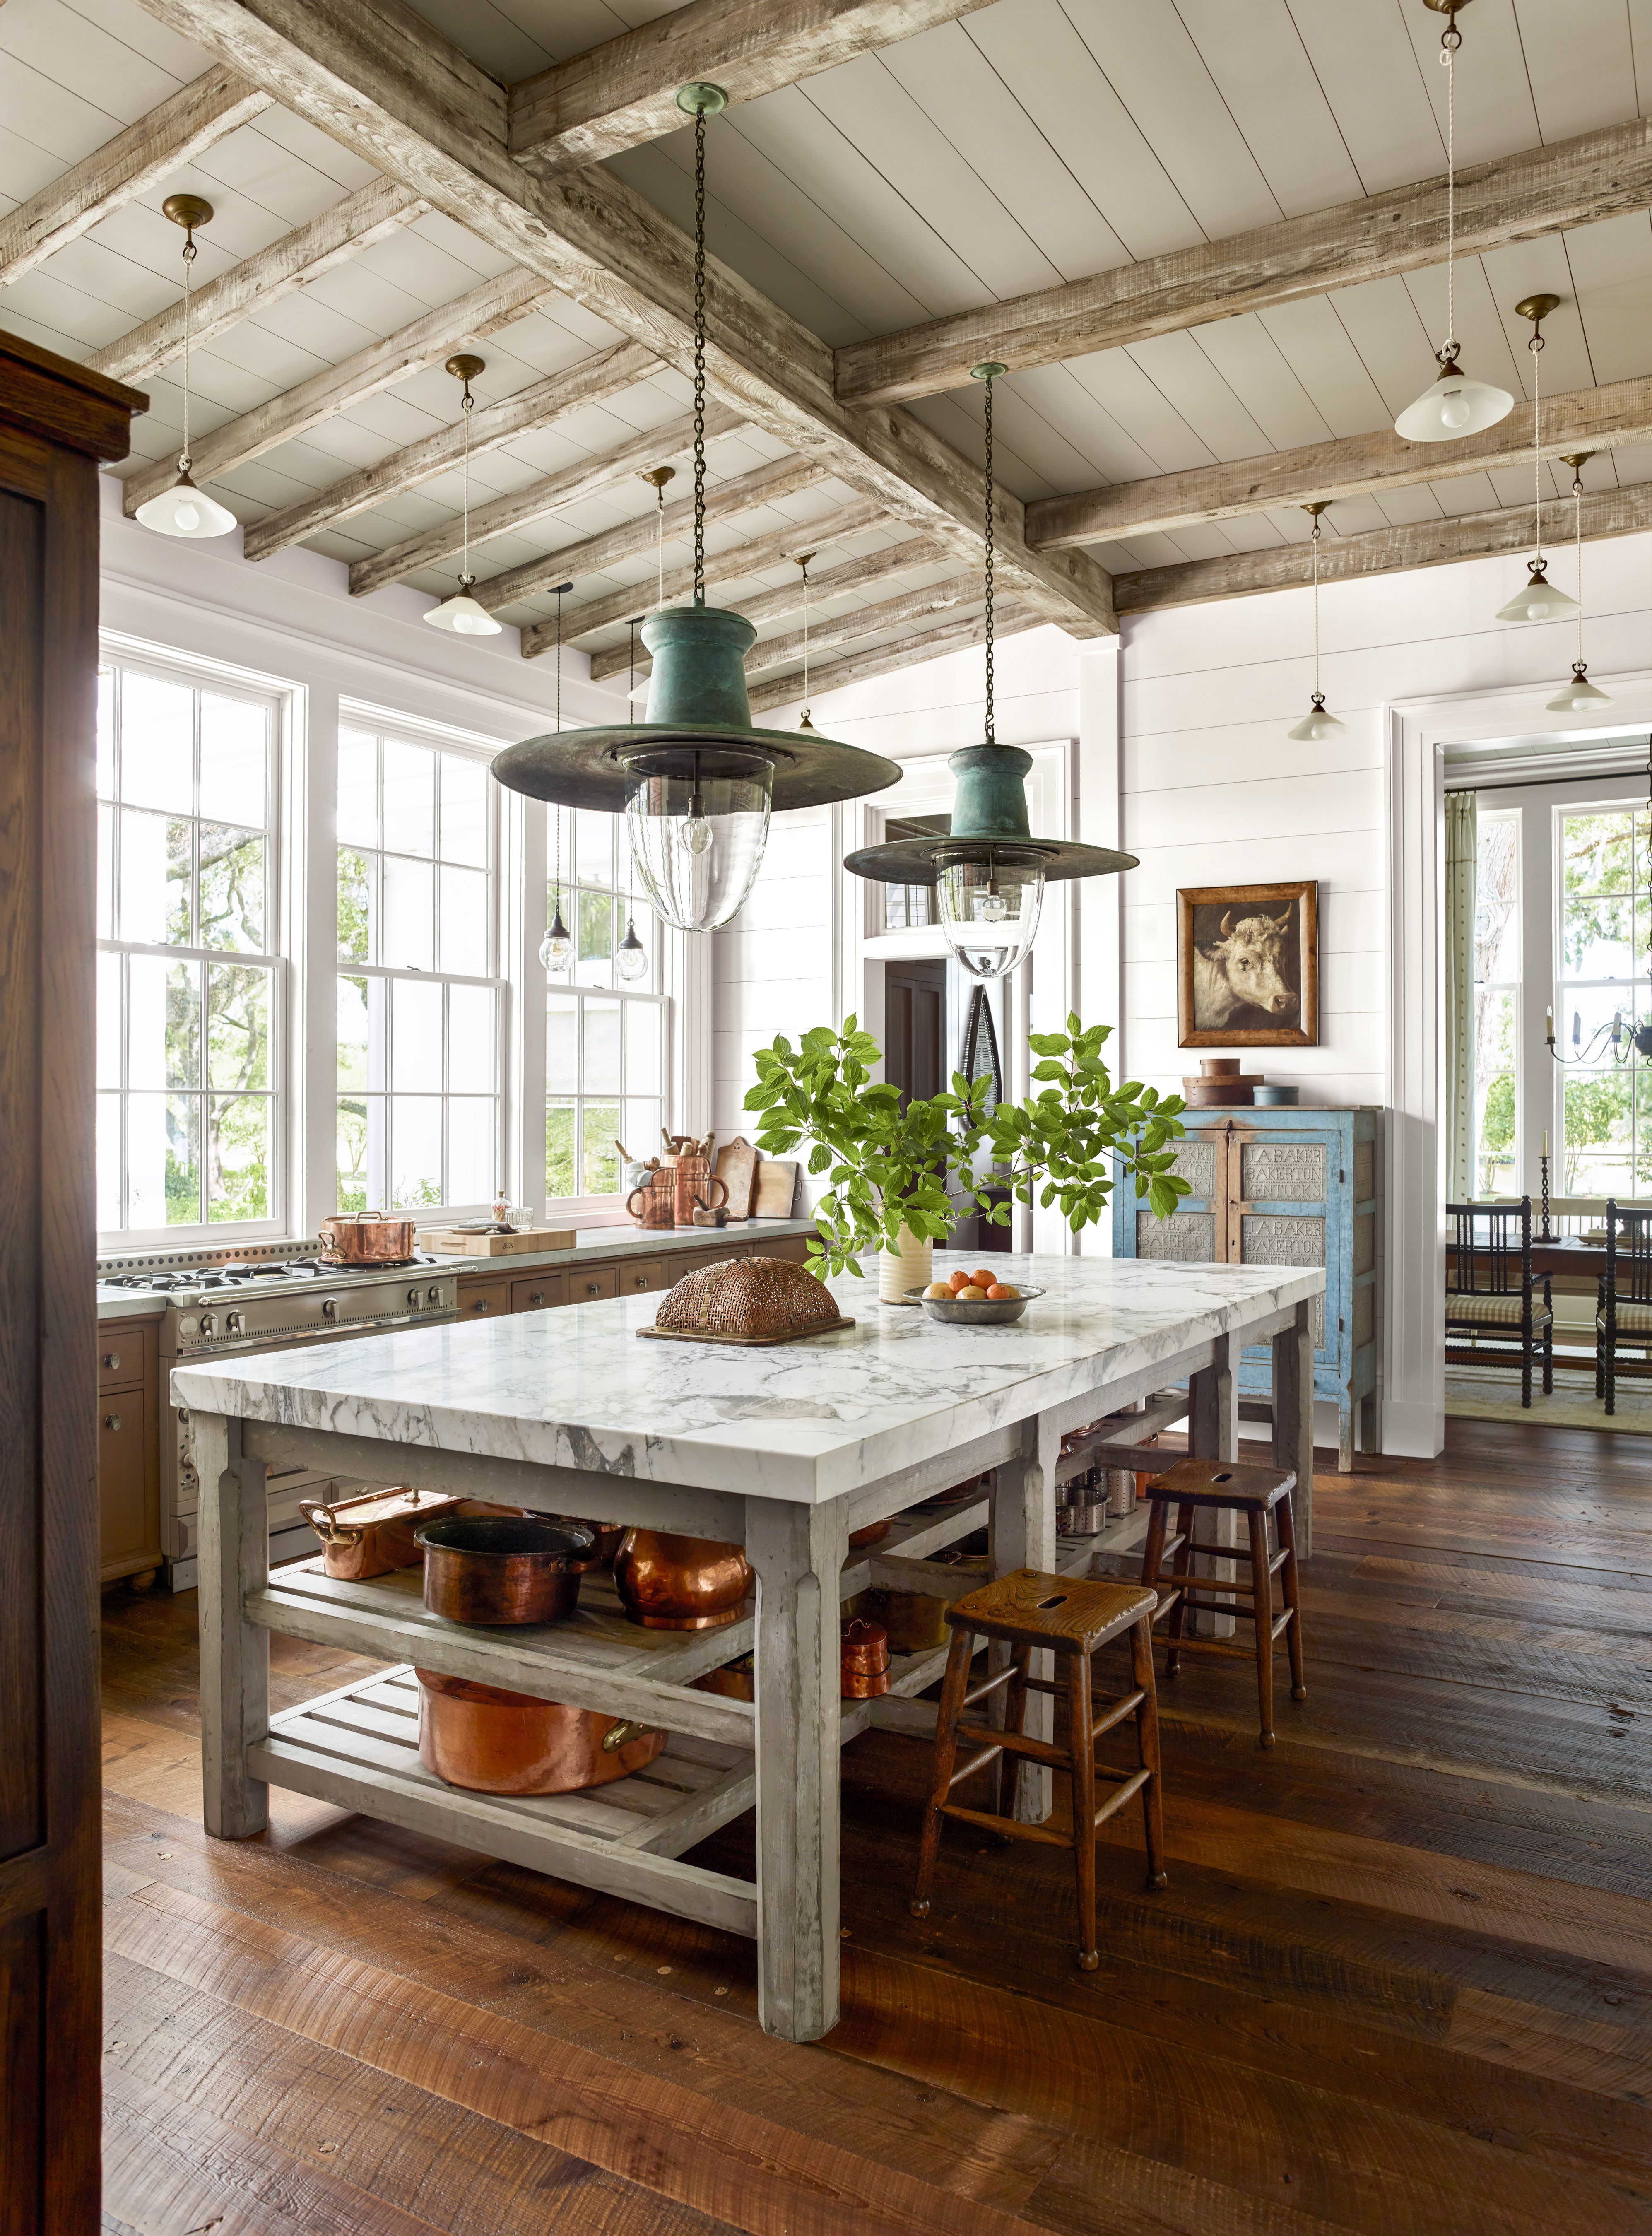 Antique Kitchen Island: Discover the Timeless Charm